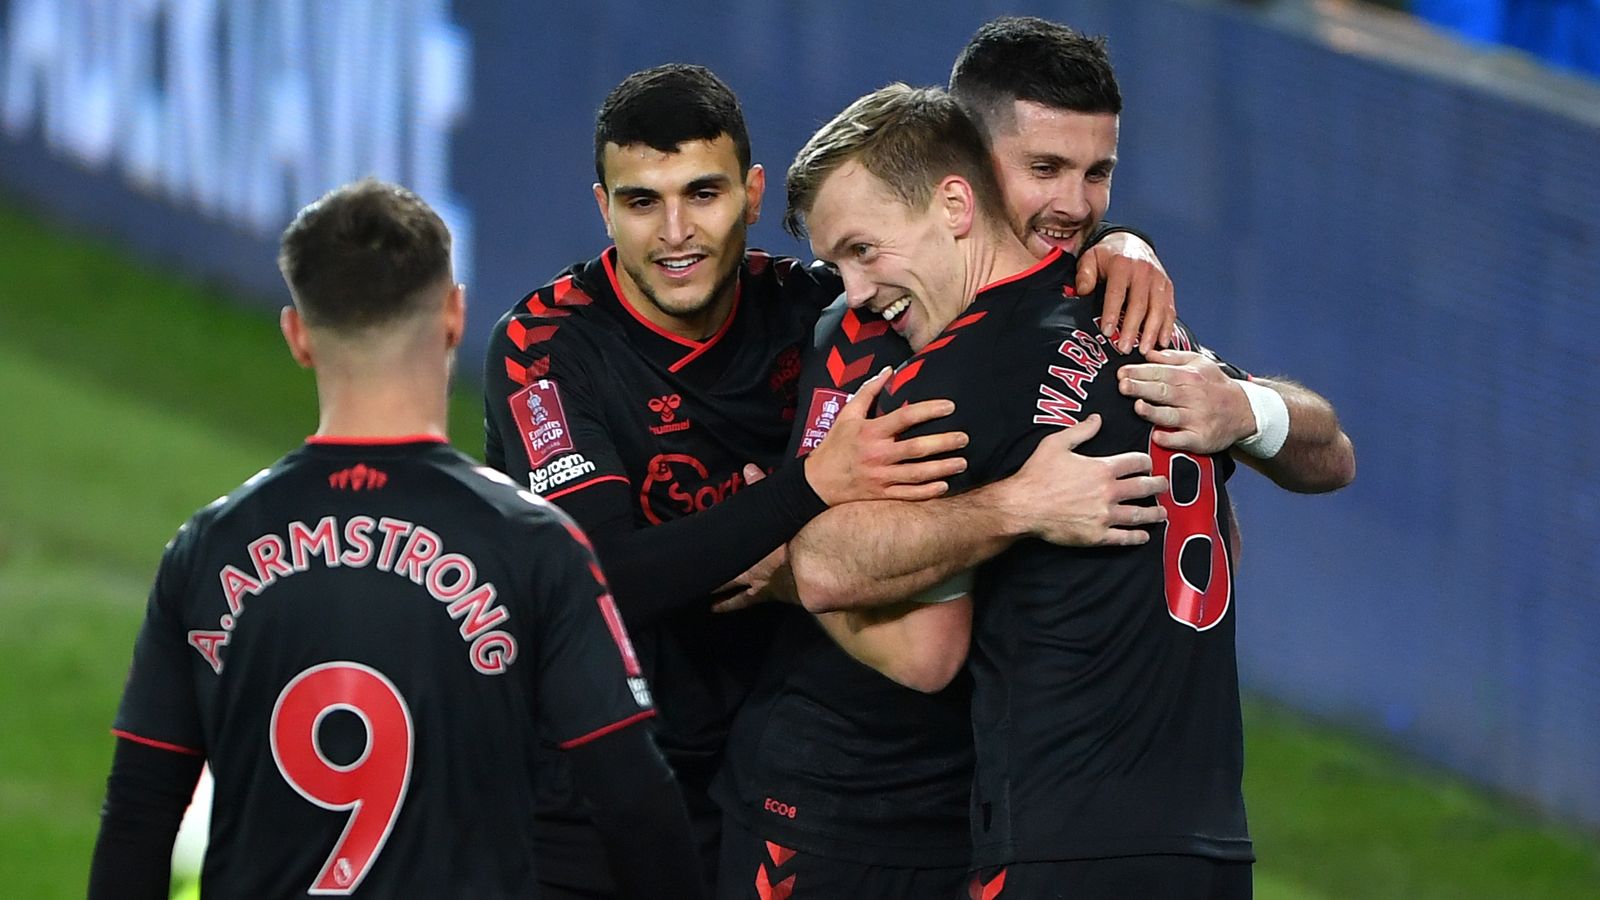 Southampton vs Brentford: Ralph Hasenhuttl unsure if Saints will have enough players for game